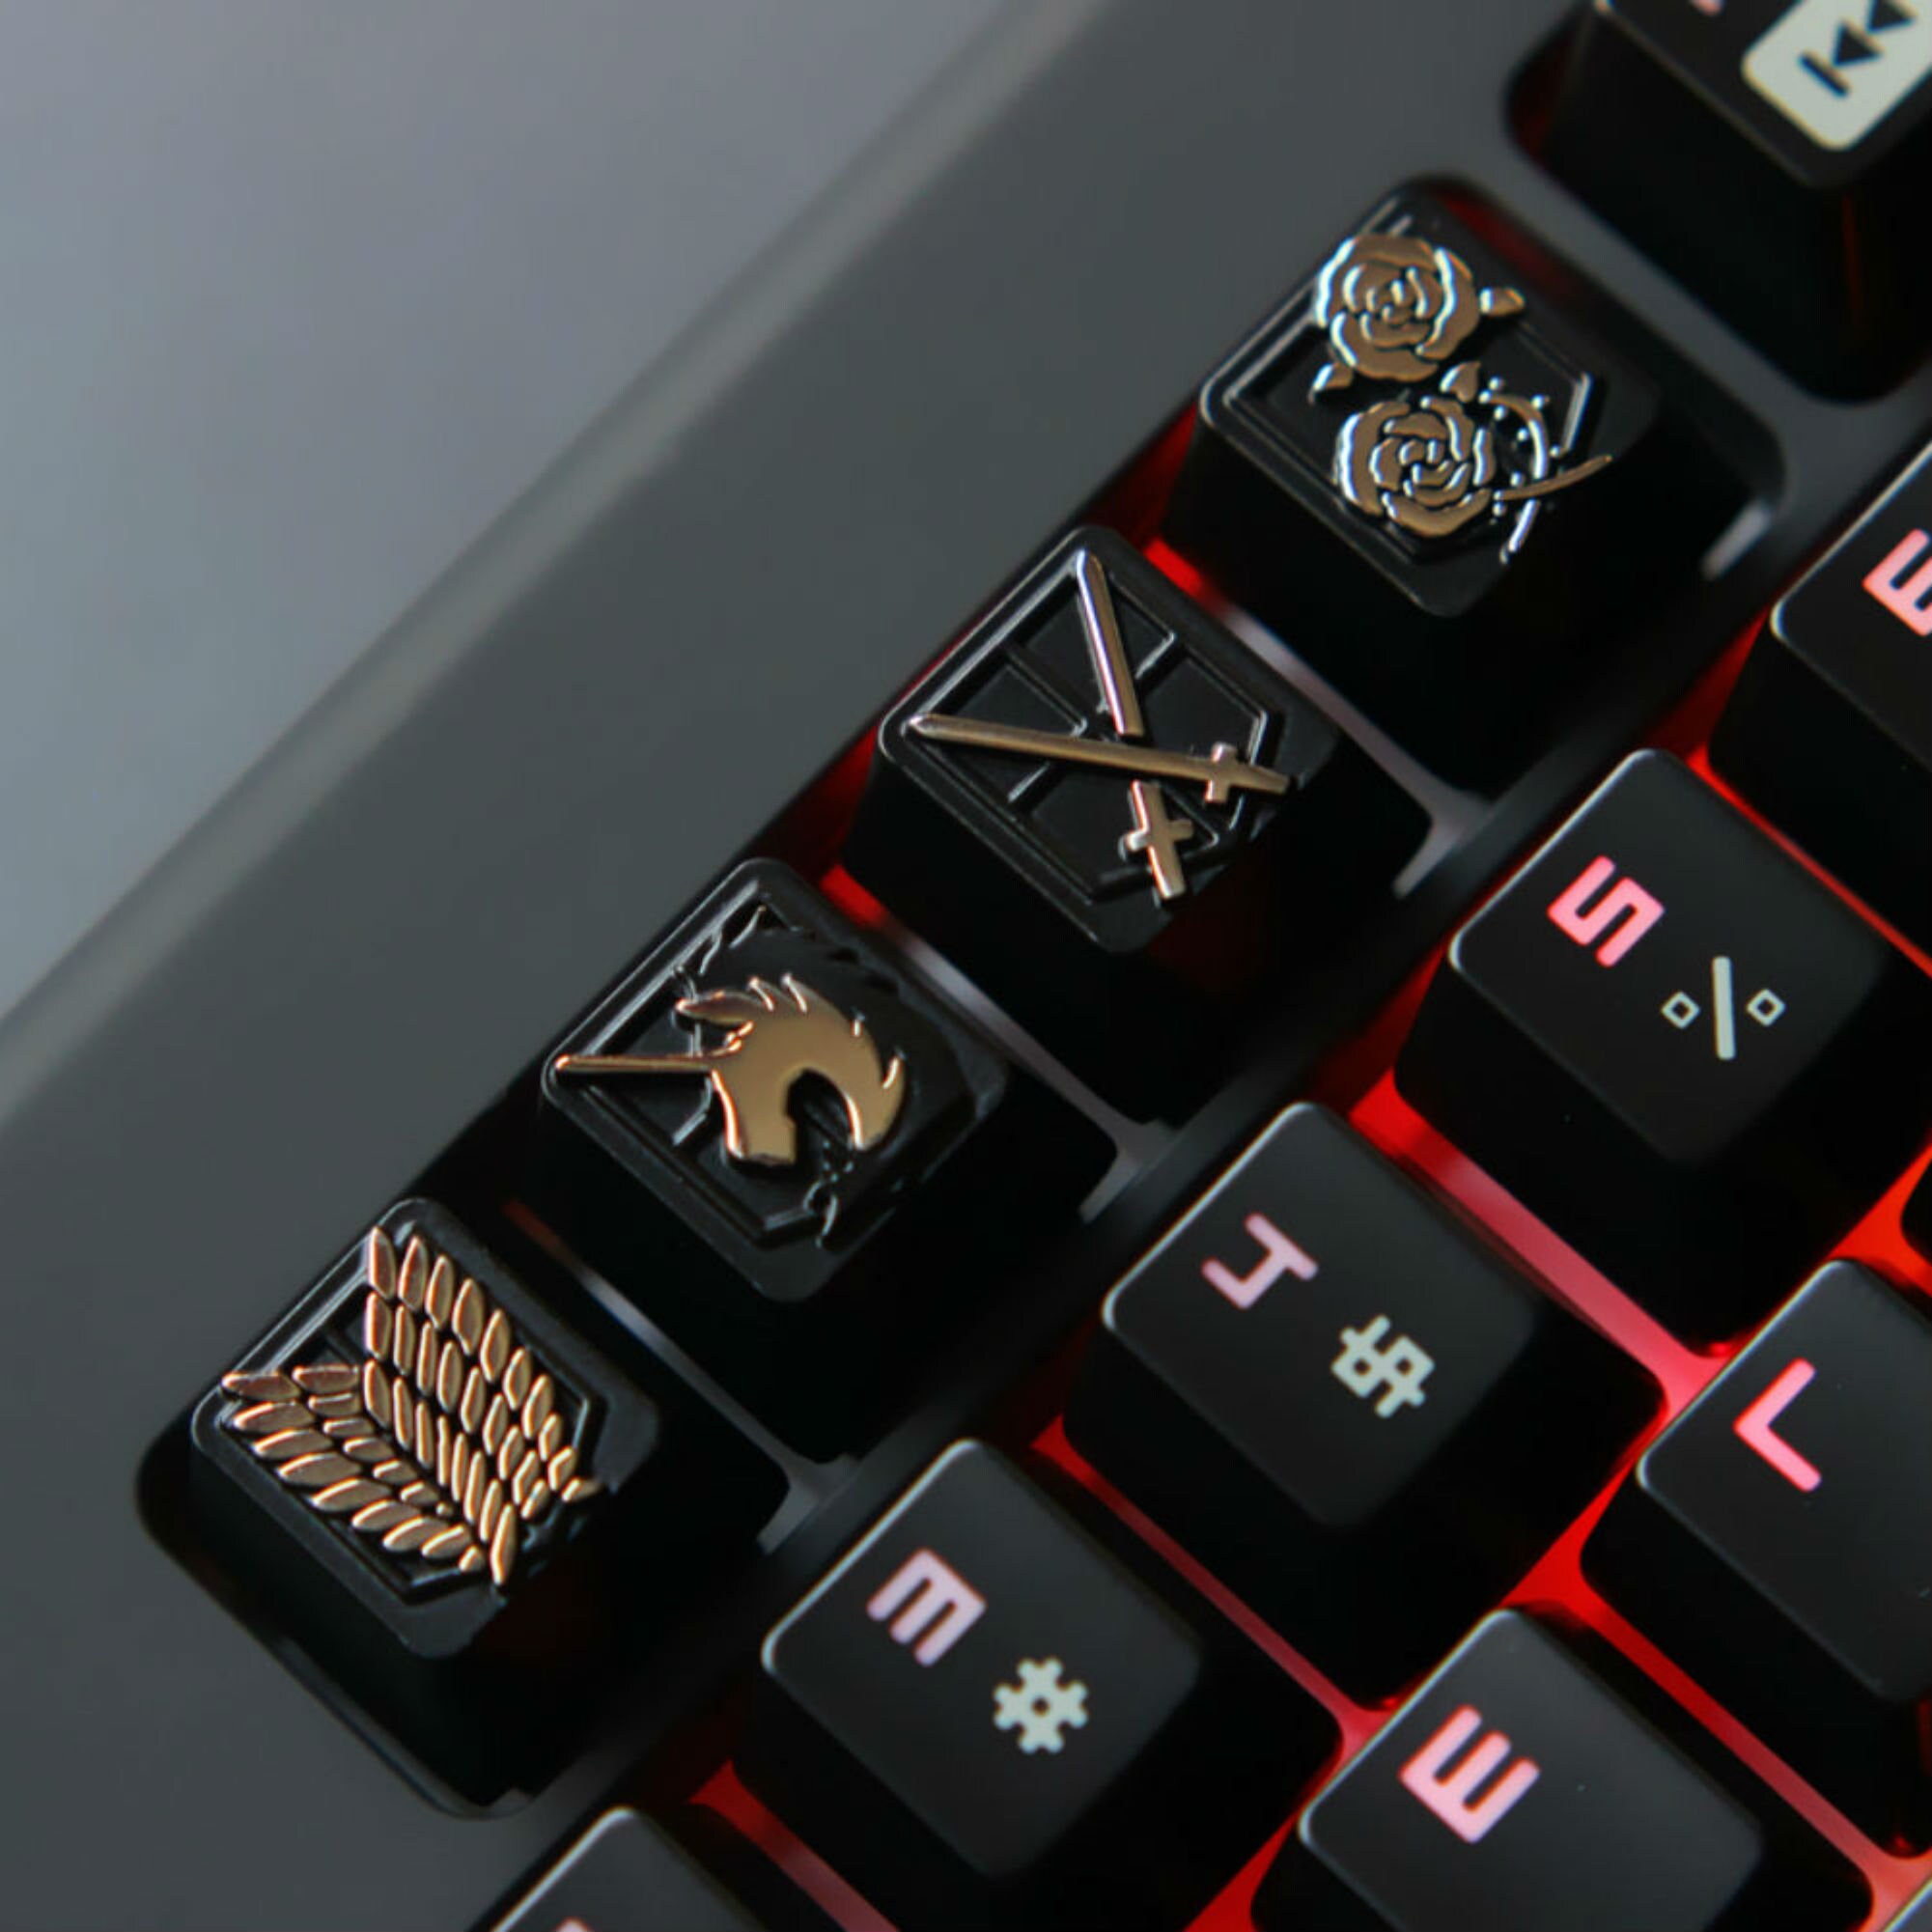 Mugen Dota Artifact Custom Gaming Keycaps for Cherry MX Switches with Keycap Puller Fits Most Mechanical Keyboards 